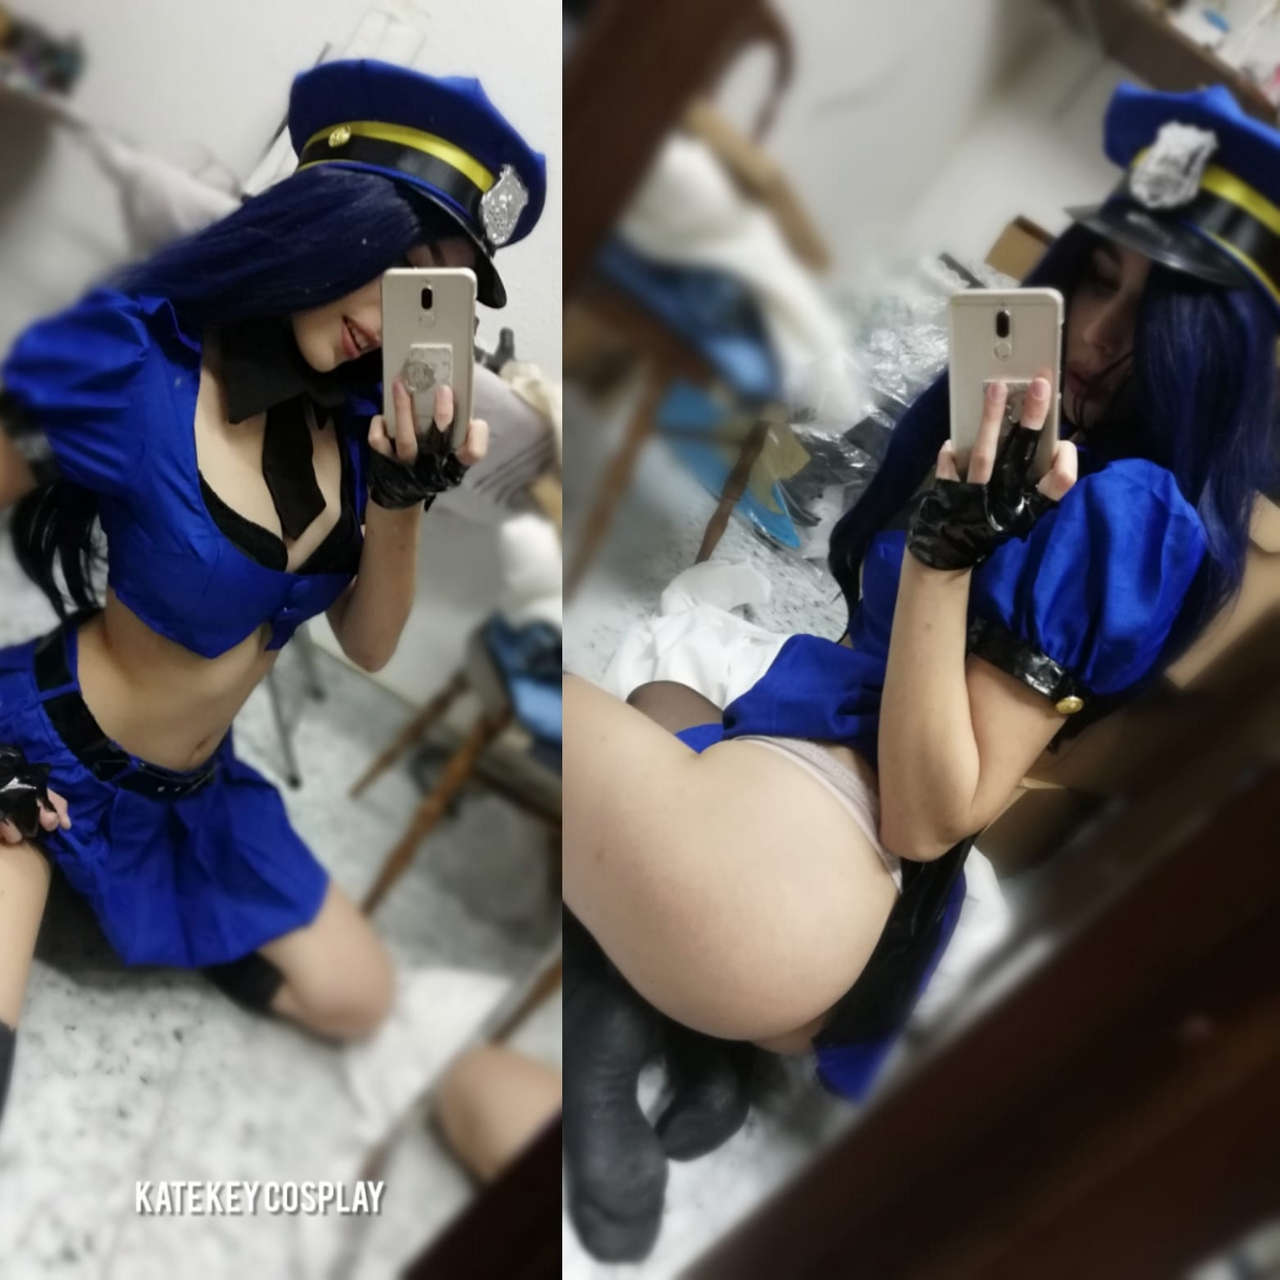 Officer Caitlyn From League Of Legends By Kate